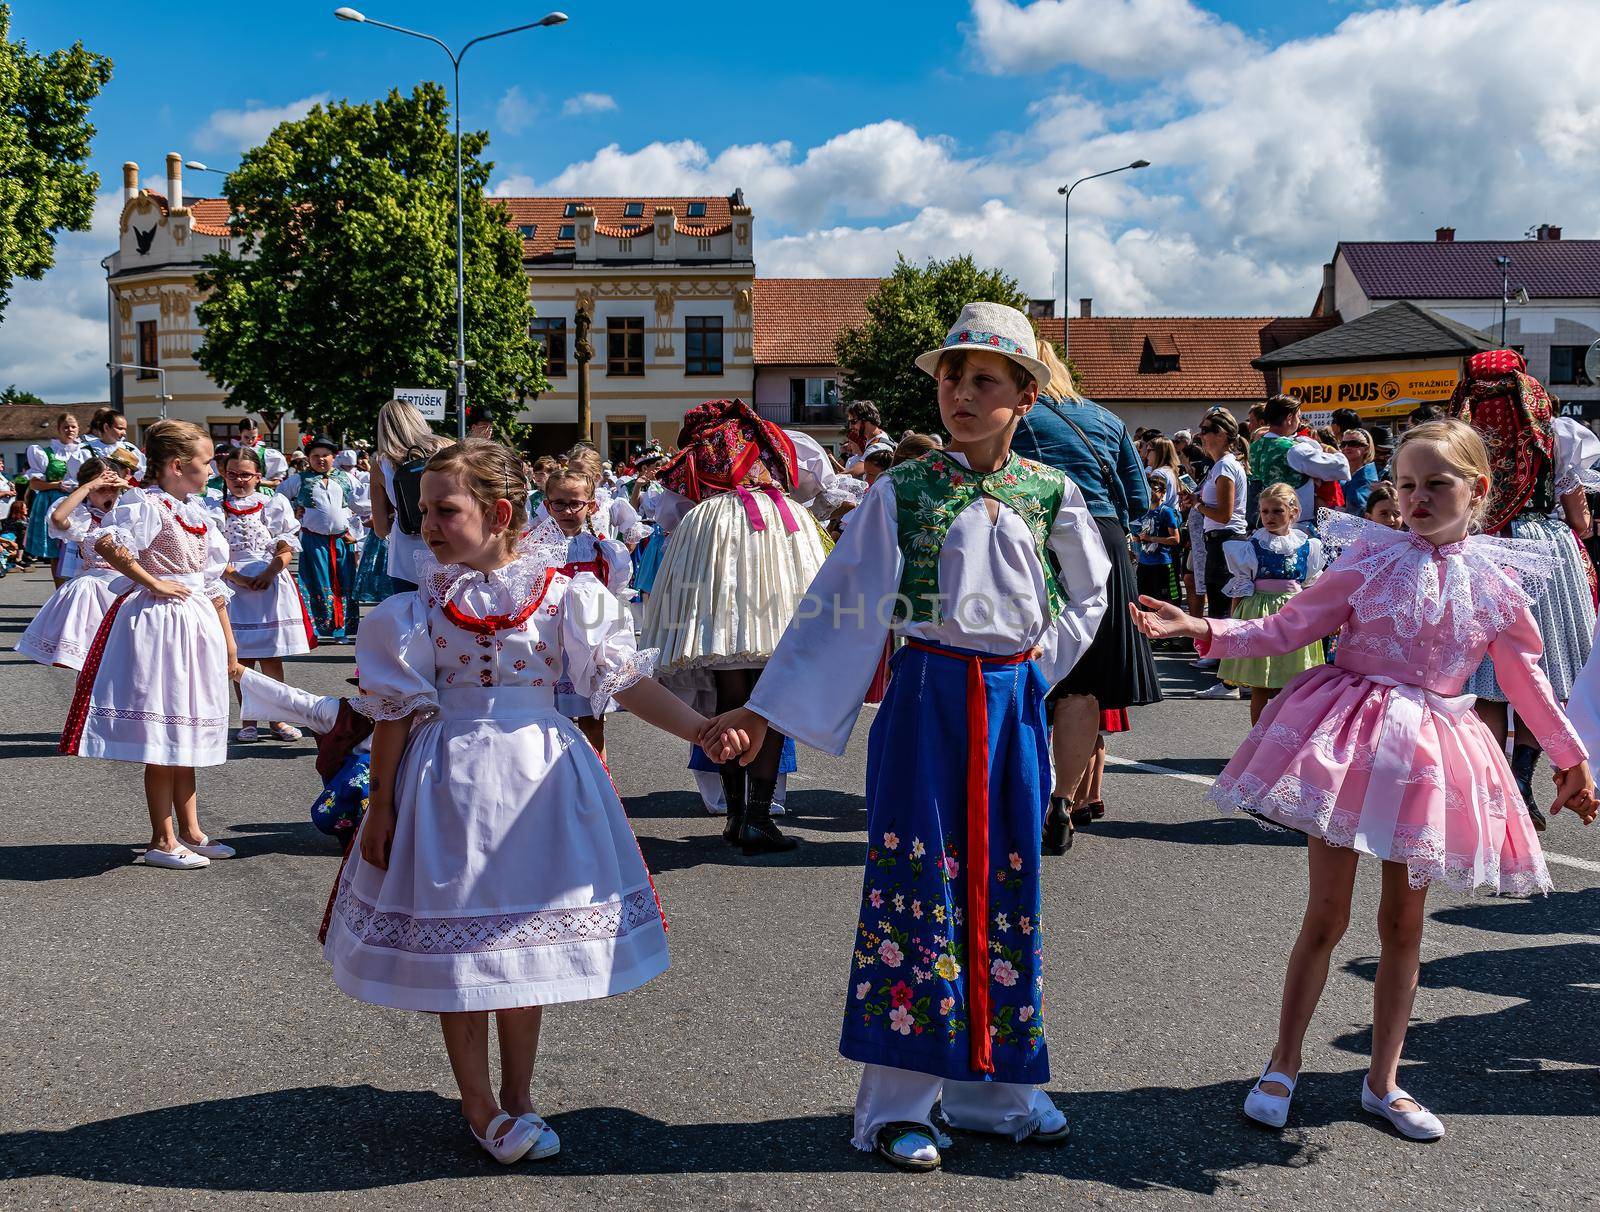 Children in Moravian folk costume in the procession by rostik924